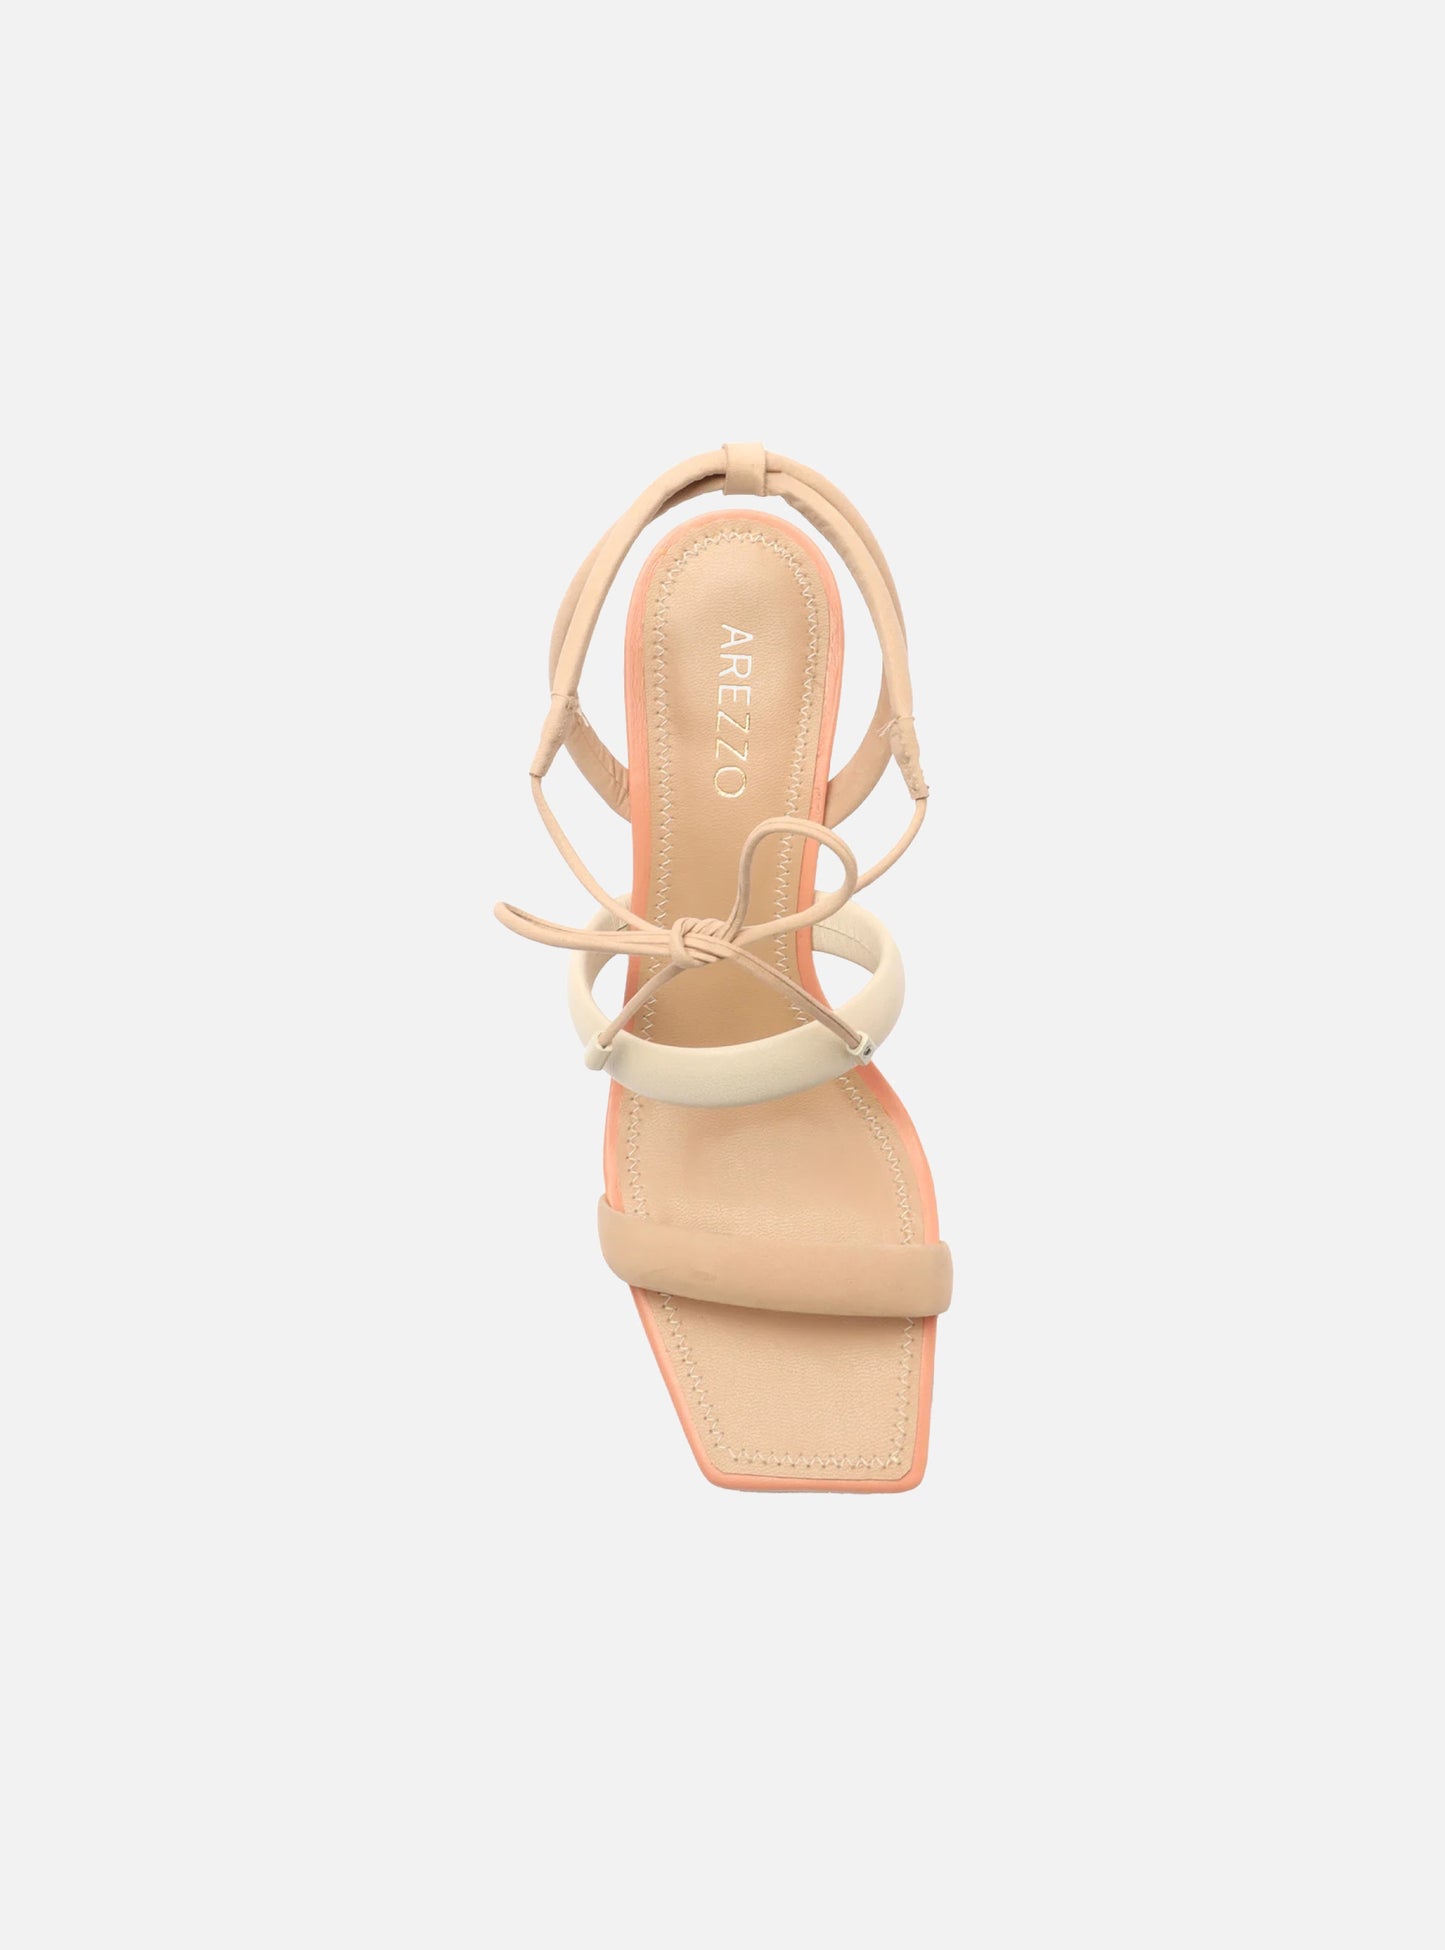 Beige Synthetic Leather Lenny High Block Sandal Top View